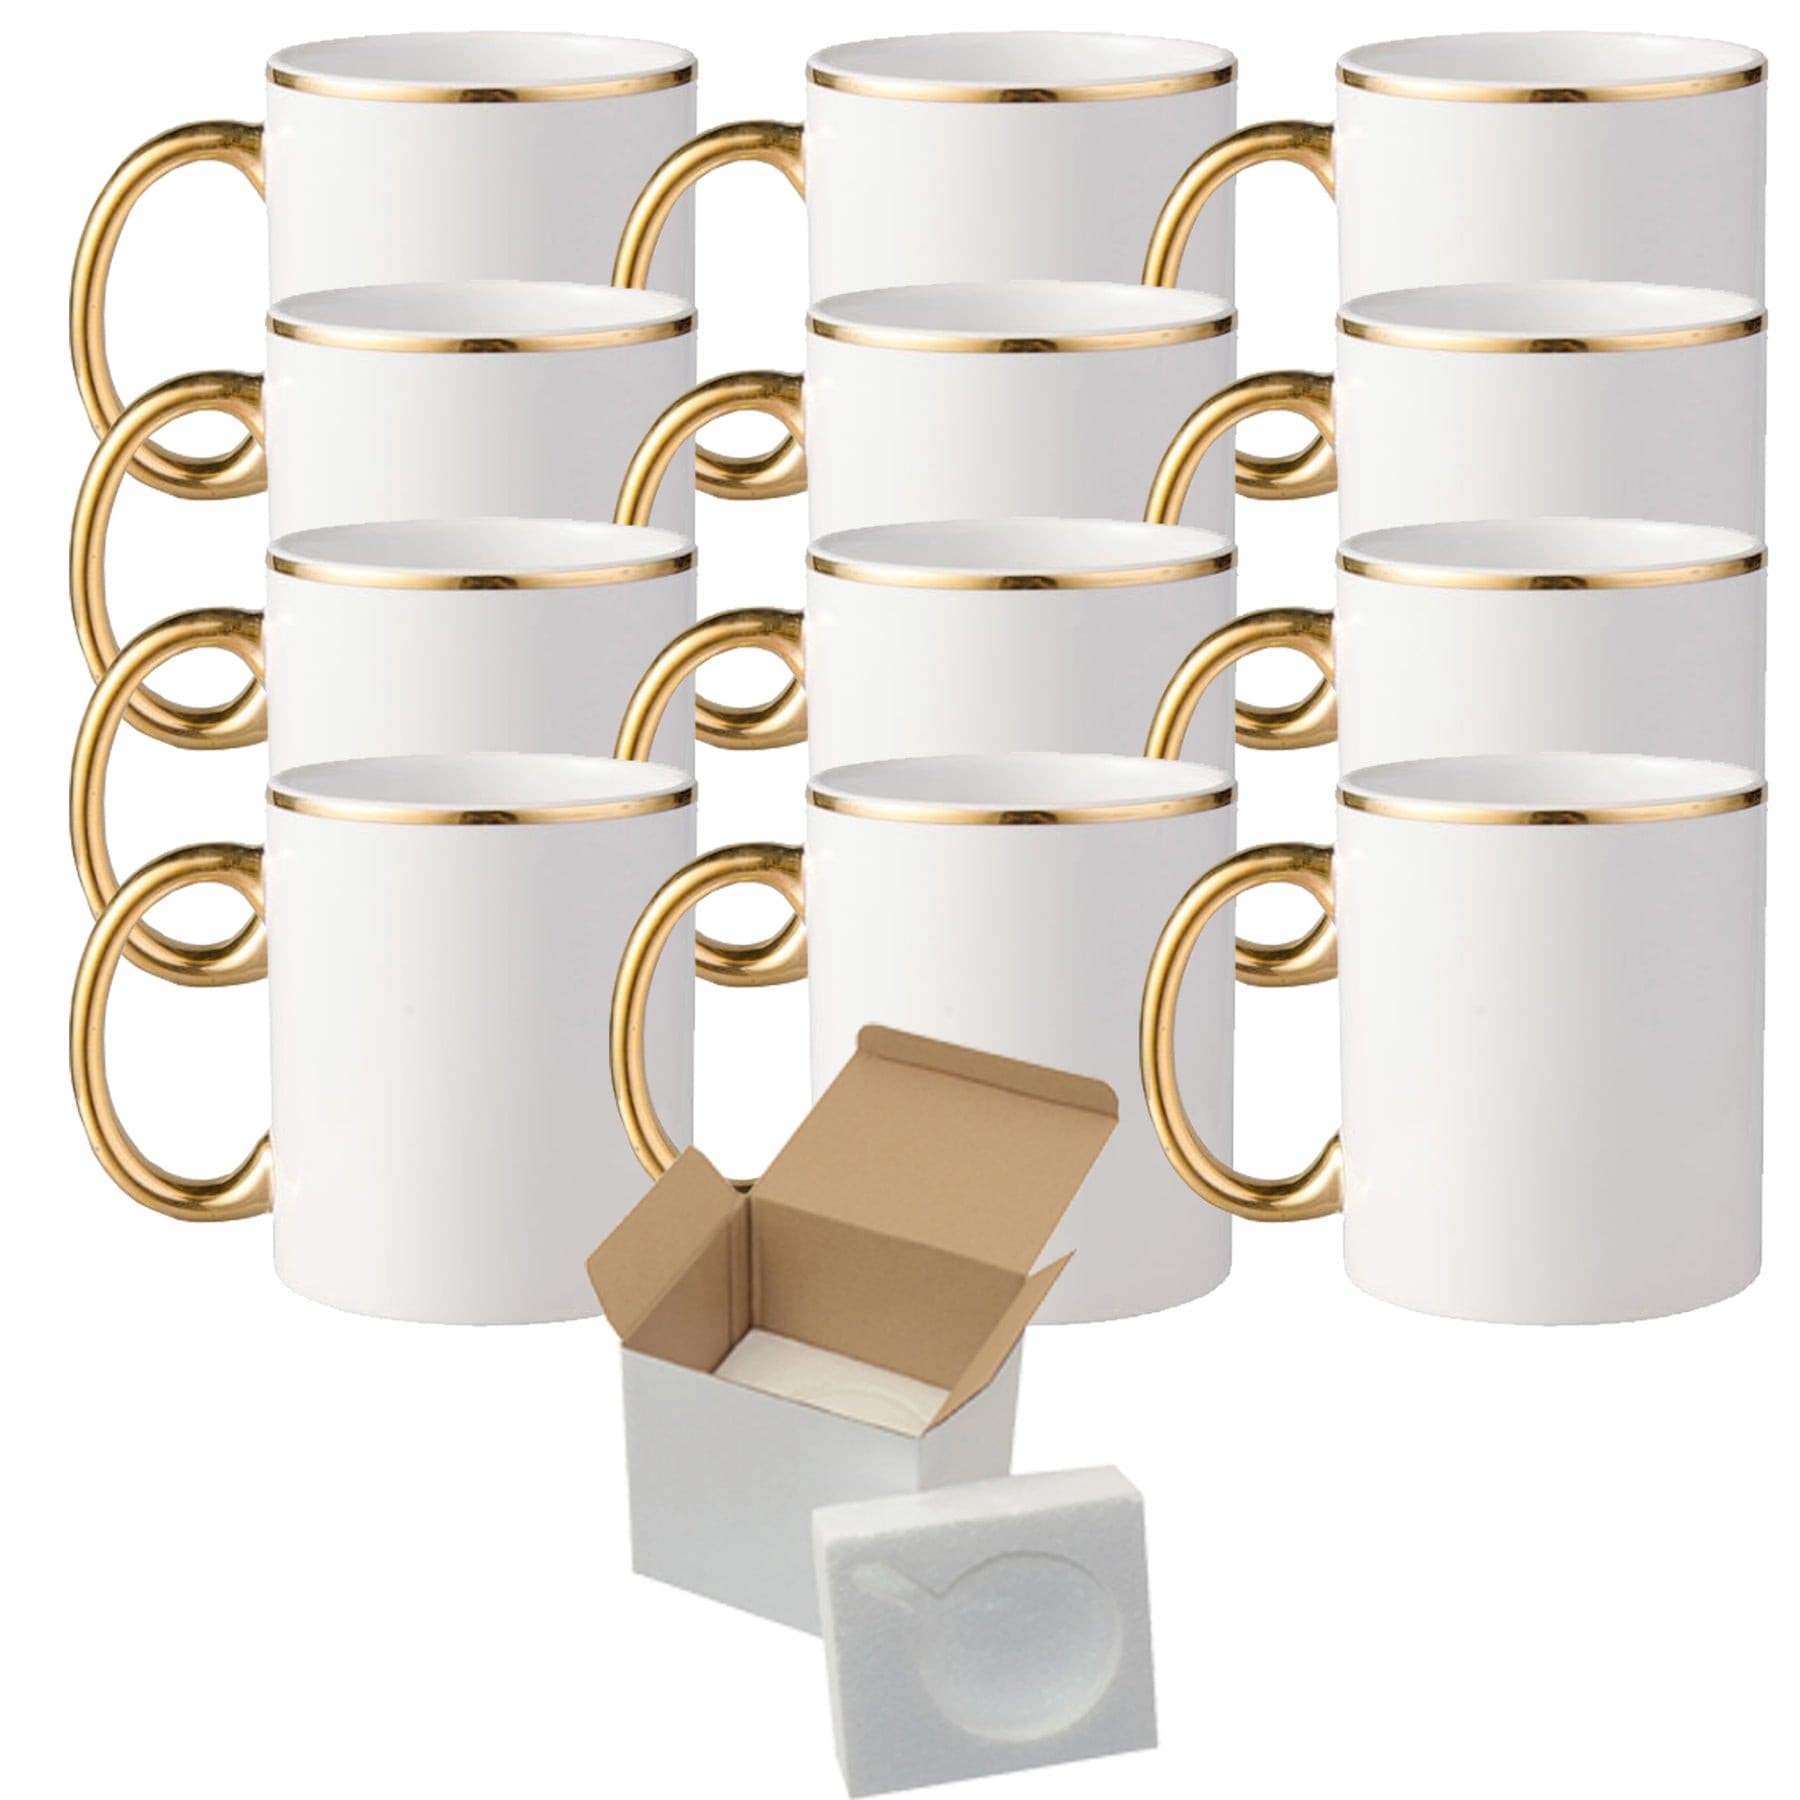 12pcs Sublimation 15oz Coffee Mugs Two/Tone Blanks,6 Color to Choose From